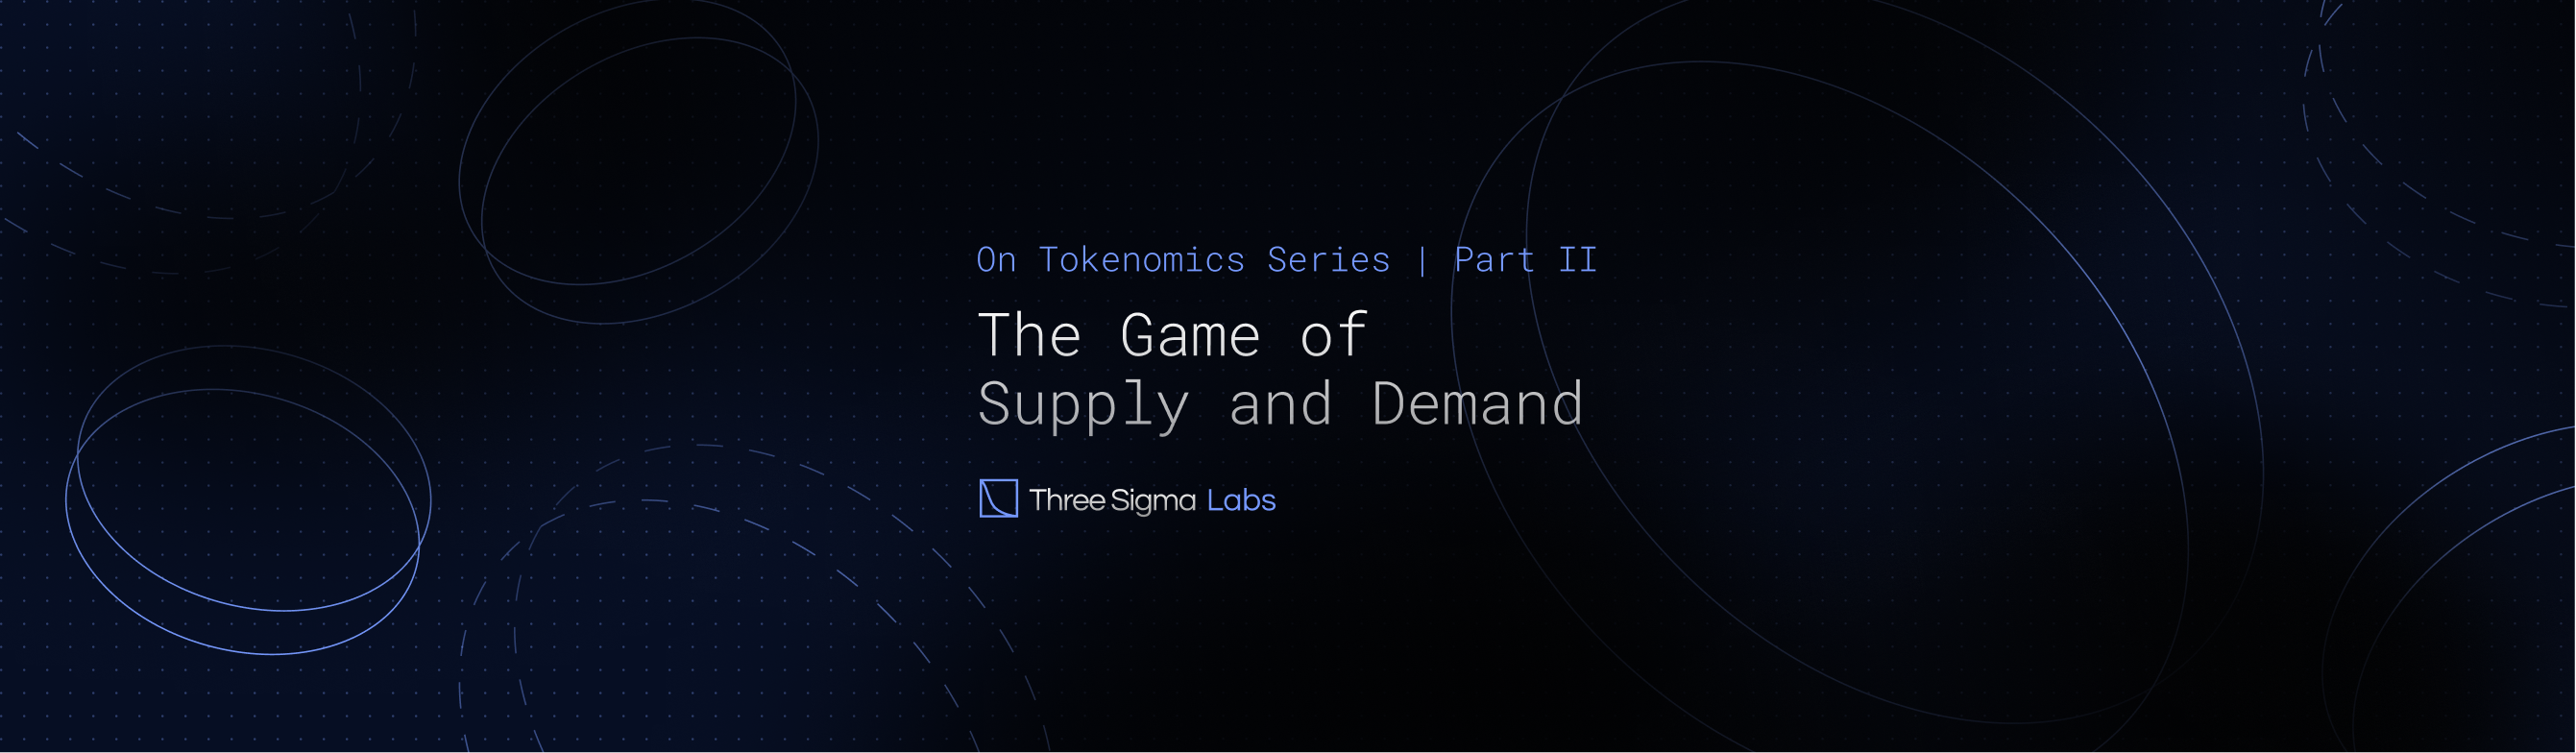 Cover Image for On Tokenomics Series Part II - The Game of Supply and Demand